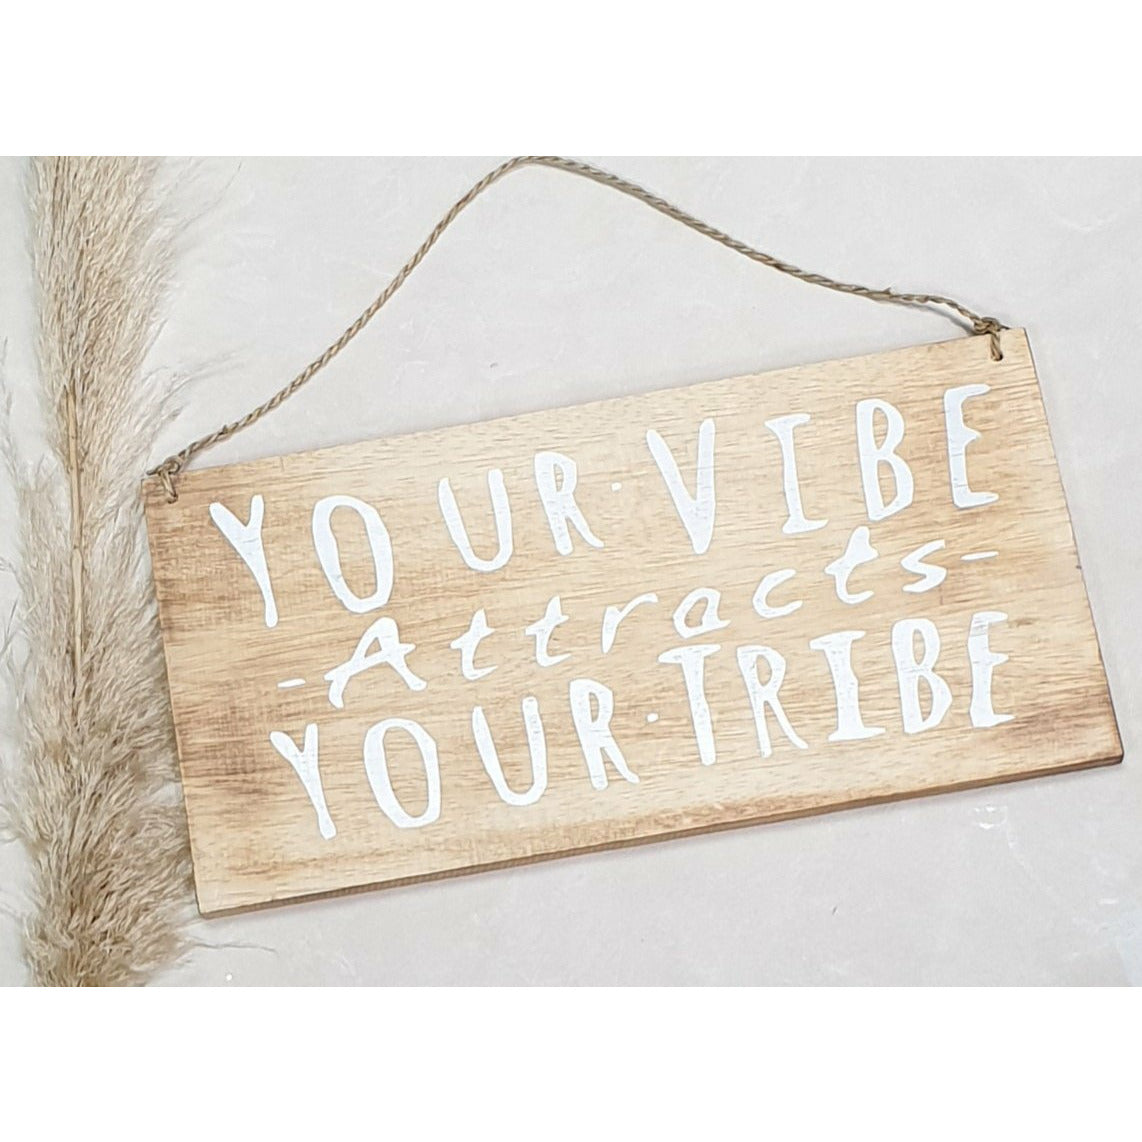 Boho wooden sign - "Your Vibe attracts your tribe" Not specified